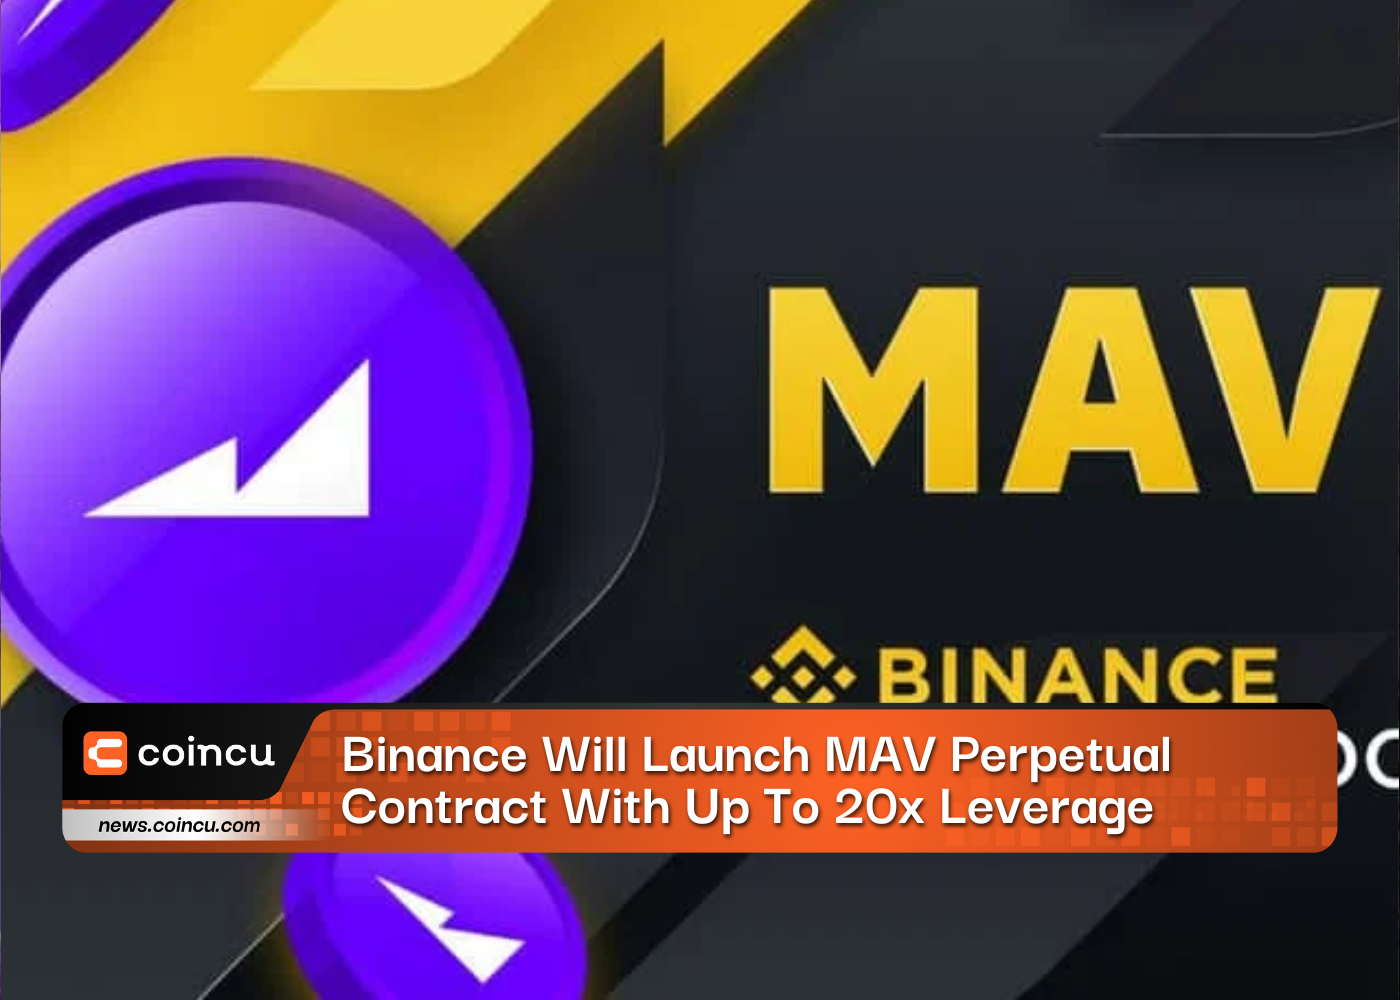 Binance Will Launch MAV Perpetual Contract With Up To 20x Leverage